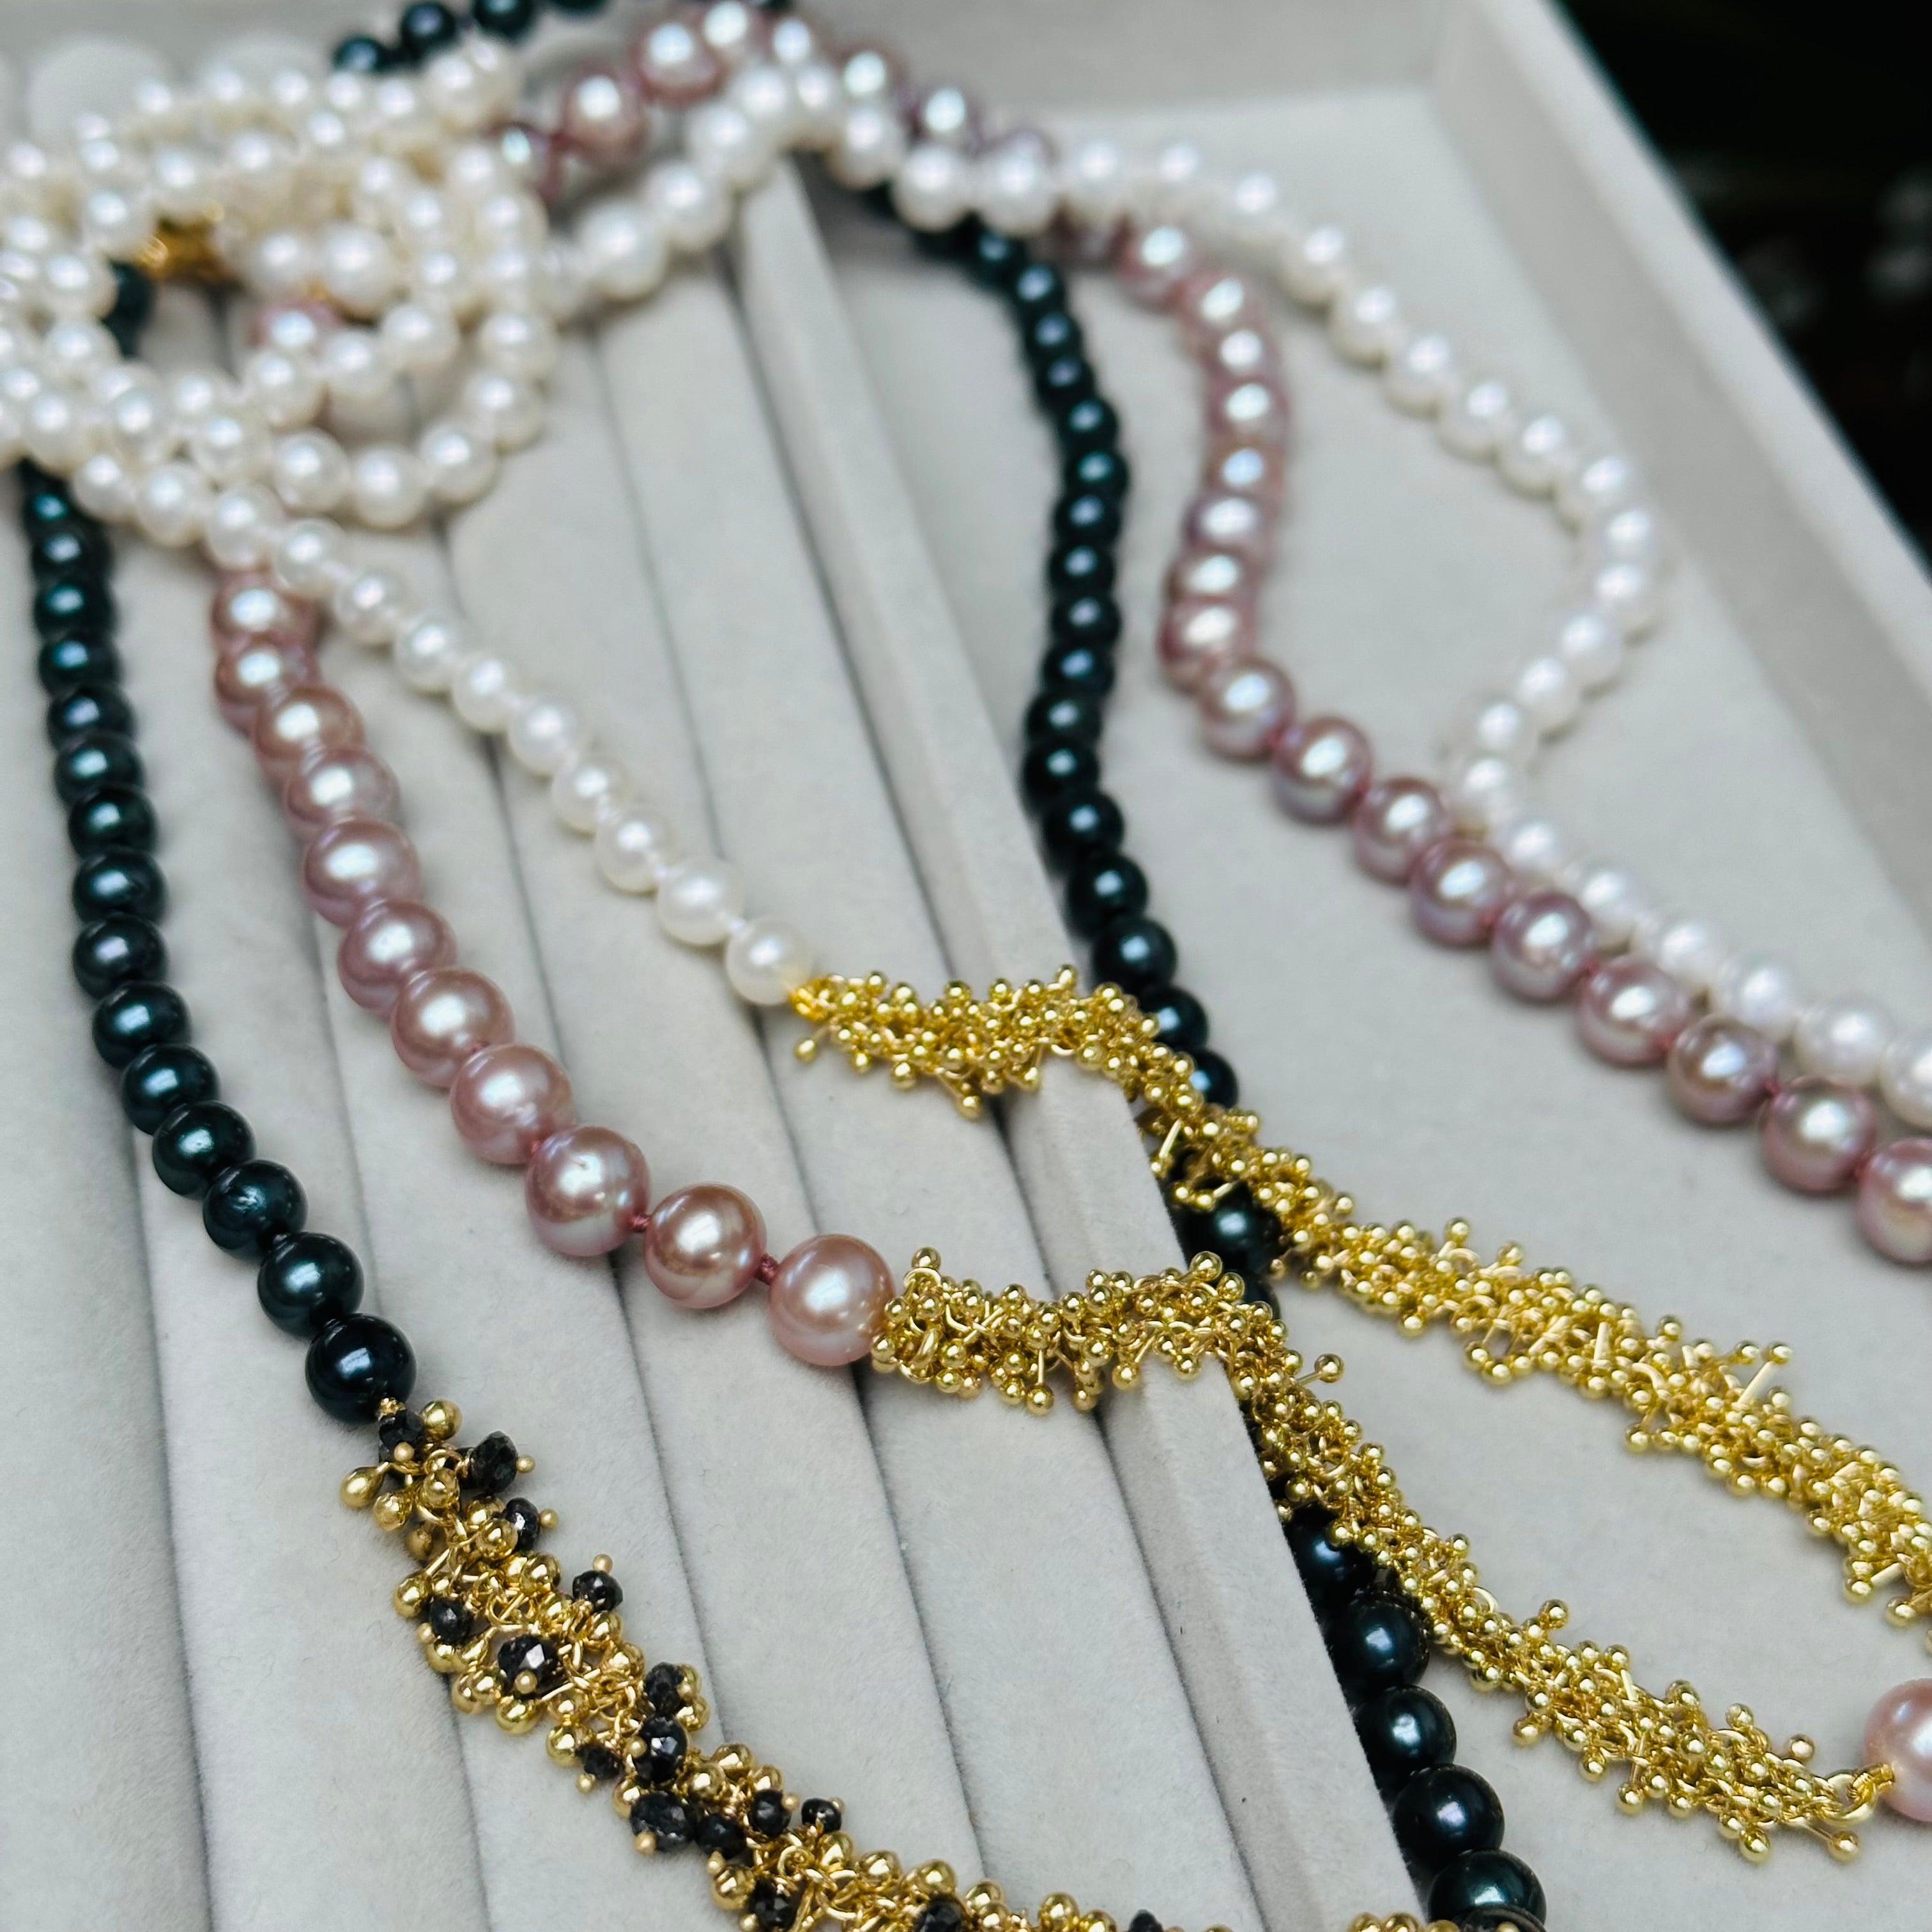 Pearls with a signature twist